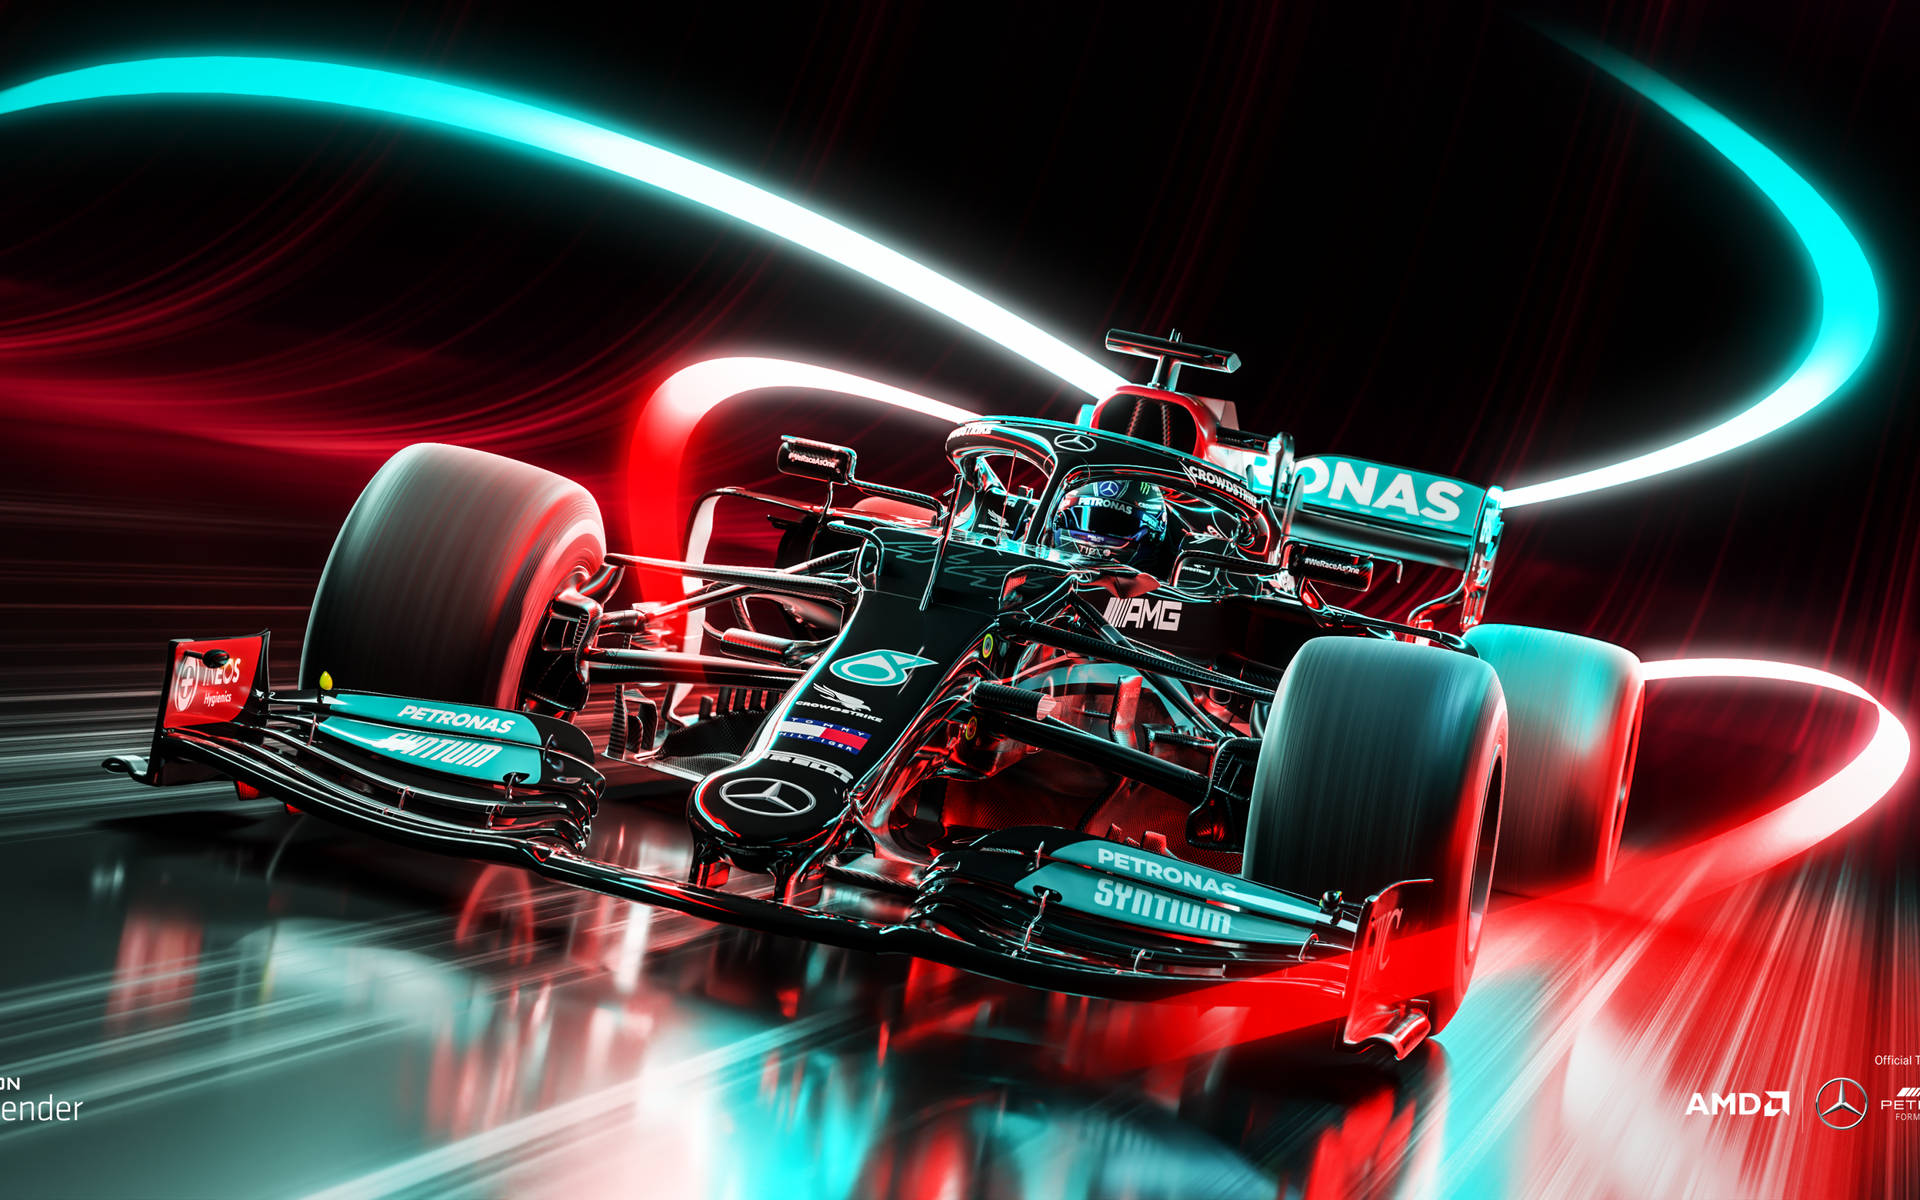 Free Cool F1 Wallpaper Downloads, Cool F1 Wallpaper for FREE